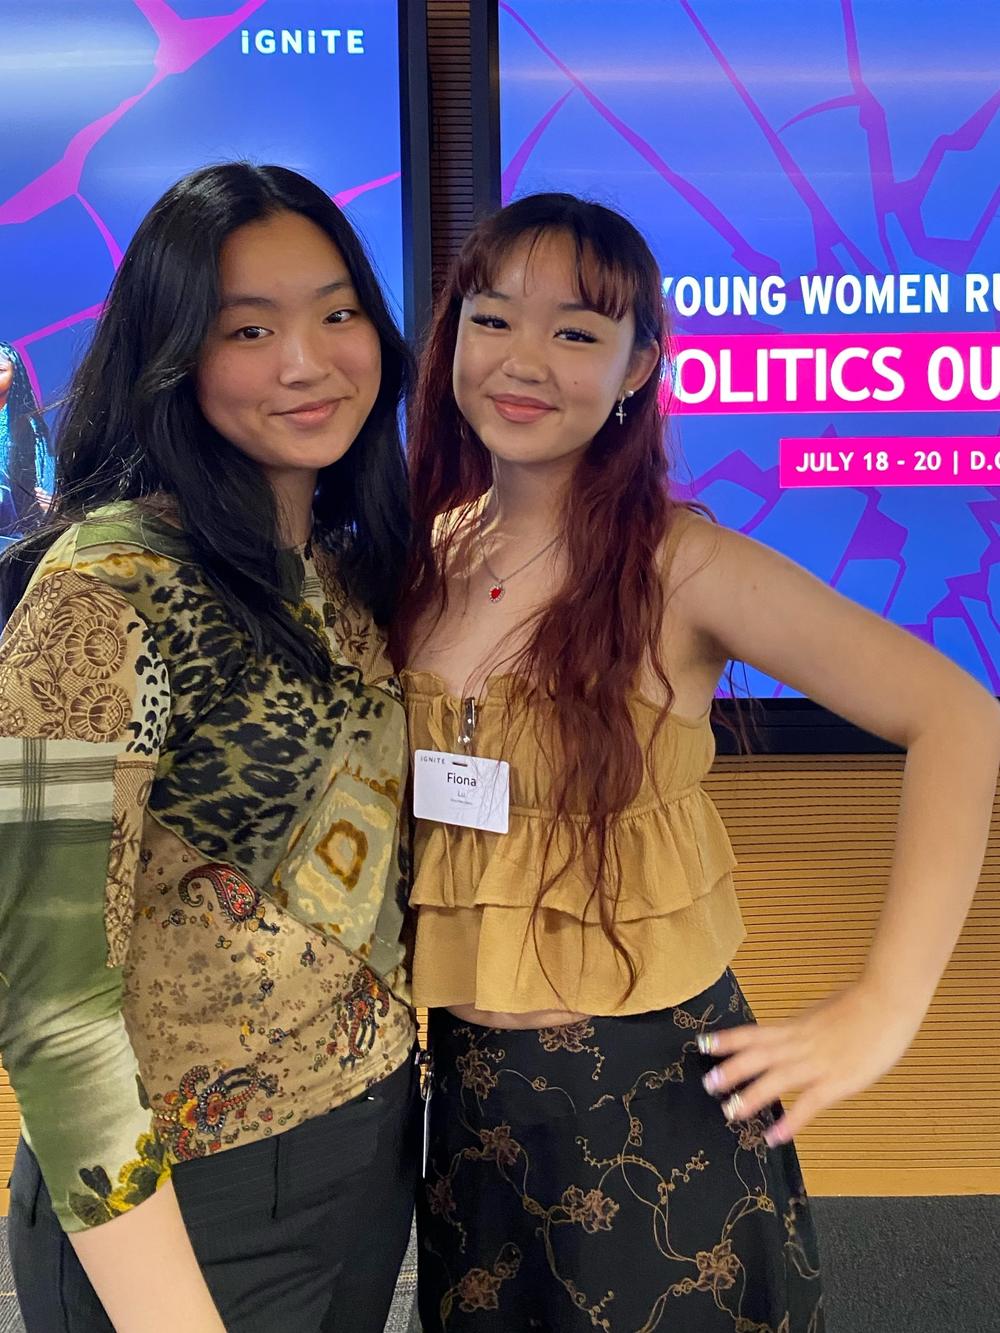 During their last year of high school, Esther Lau (left) and Fiona Lu advocated for a bill to expand low-income teens' access to mental health care. Gov. Gavin Newsom signed it into law in October.